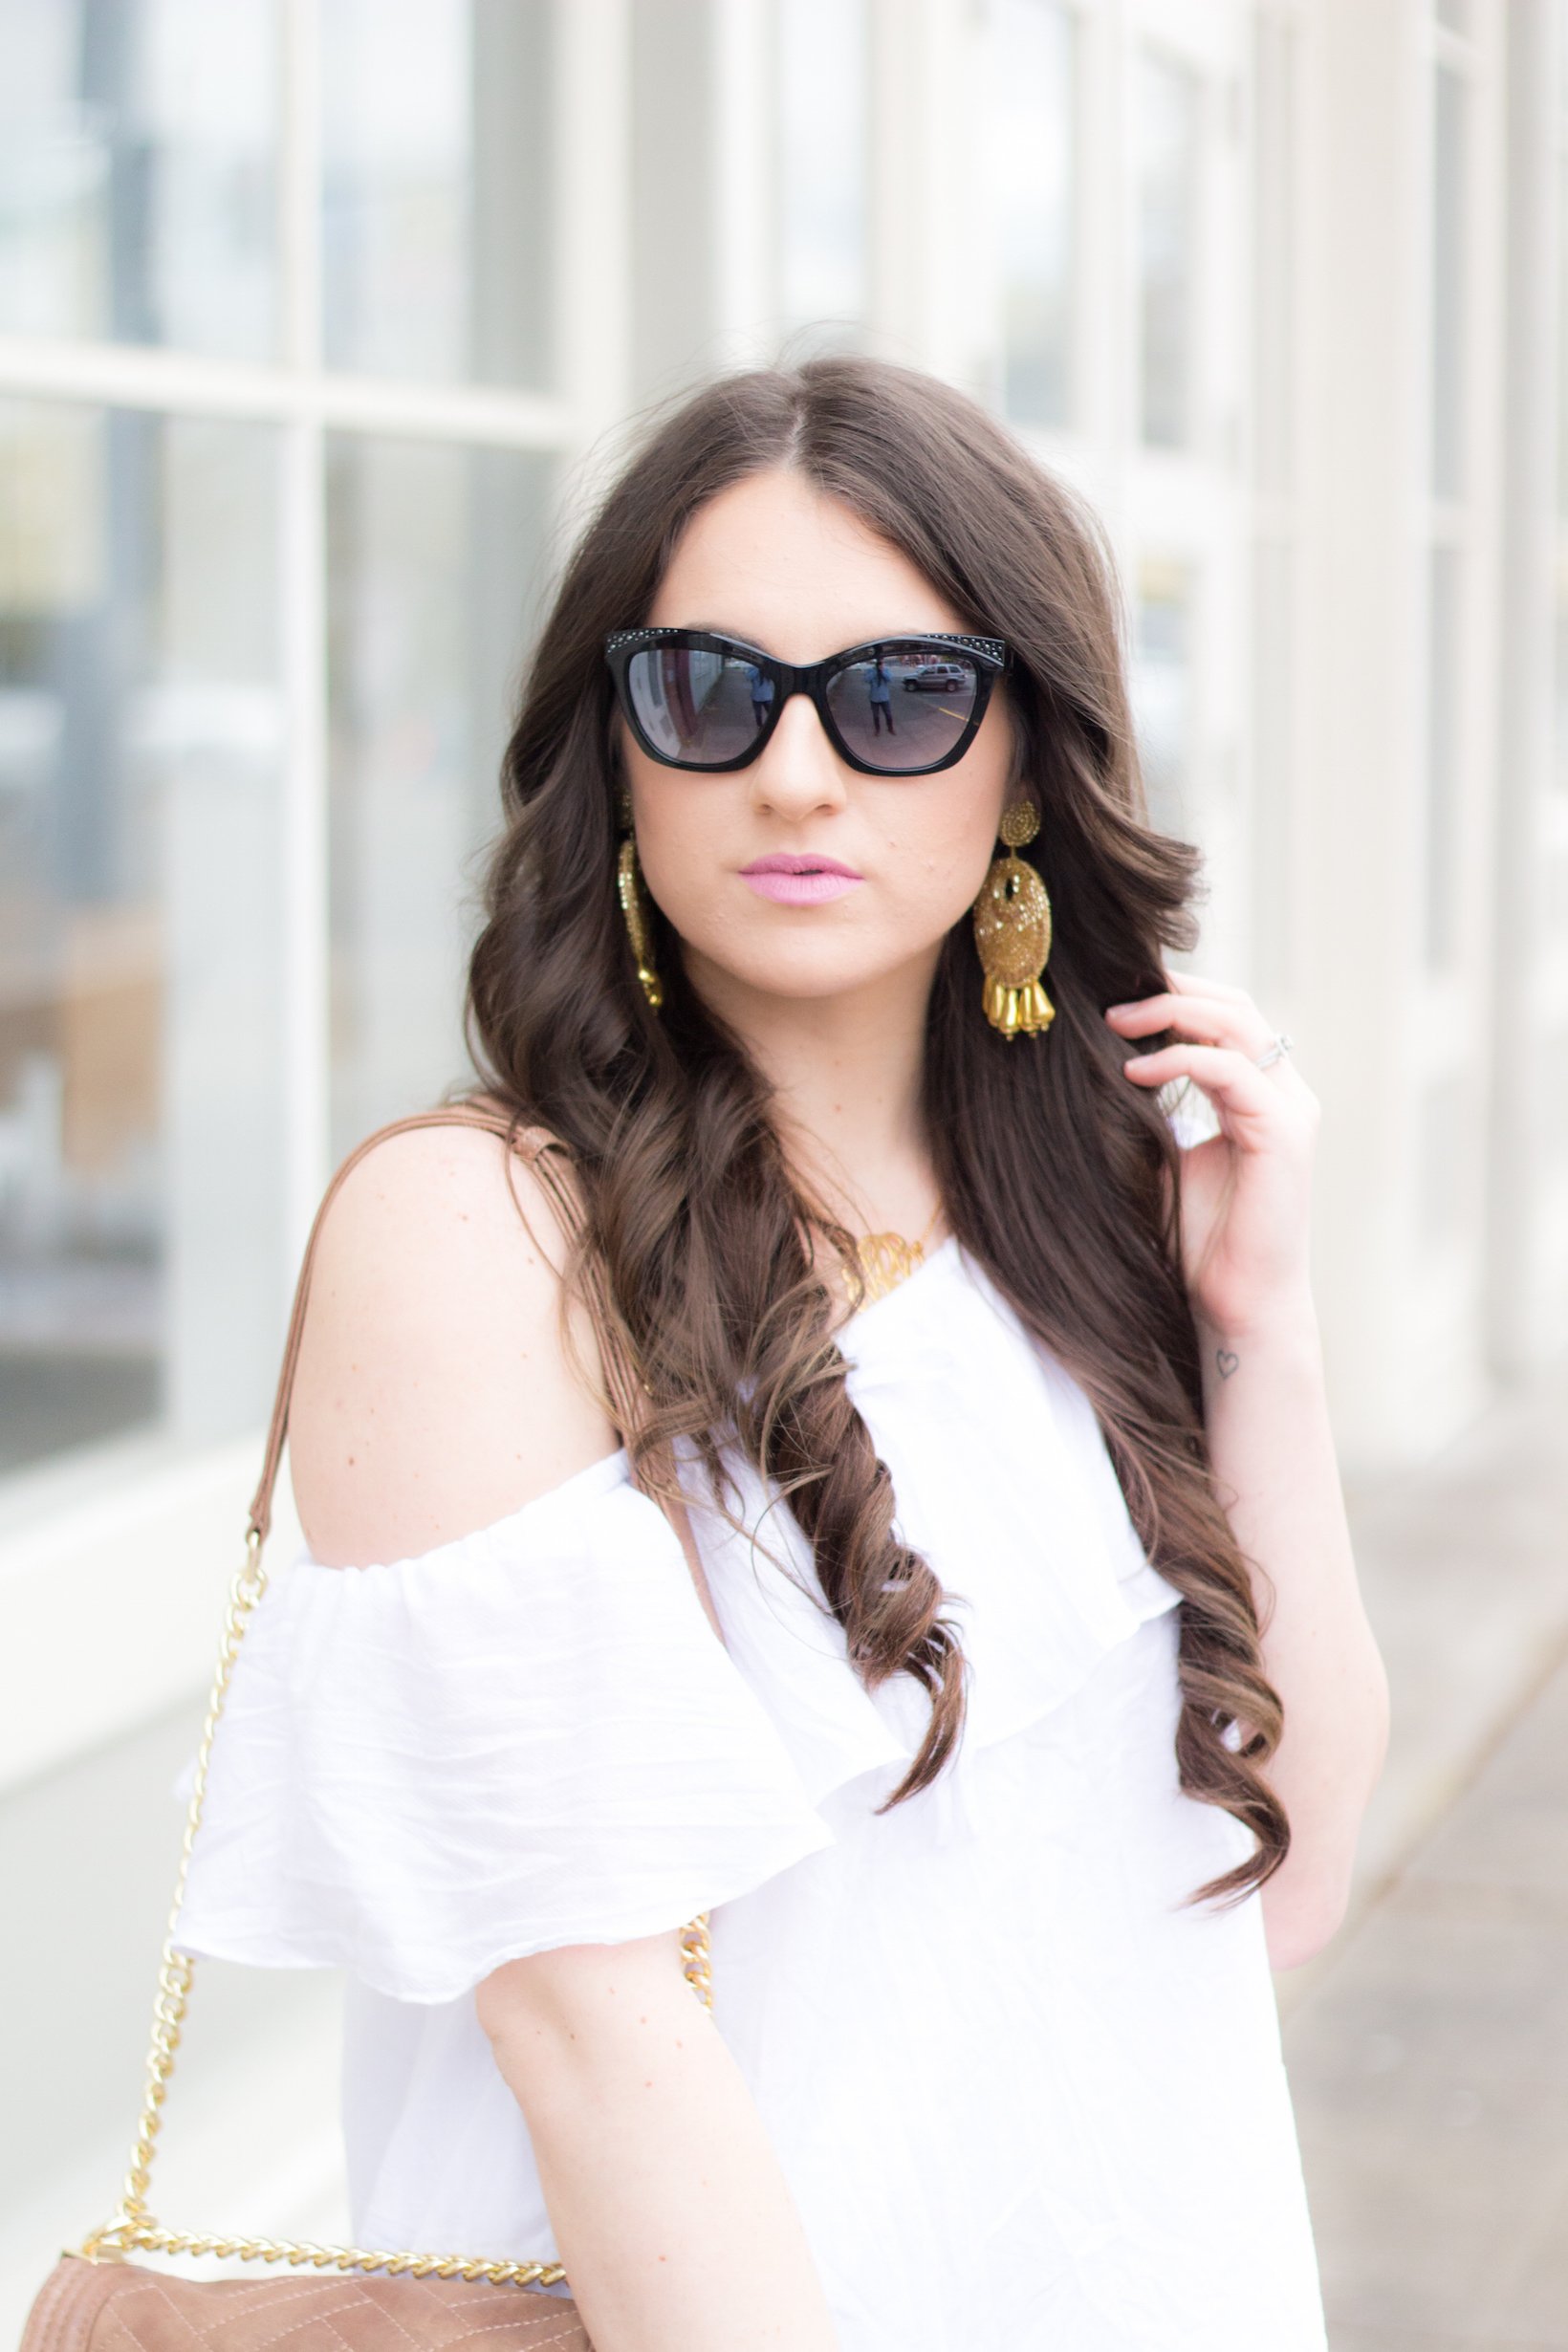 Spring Fashion with Visionworks by popular Portland style blogger Topknots and Pearls